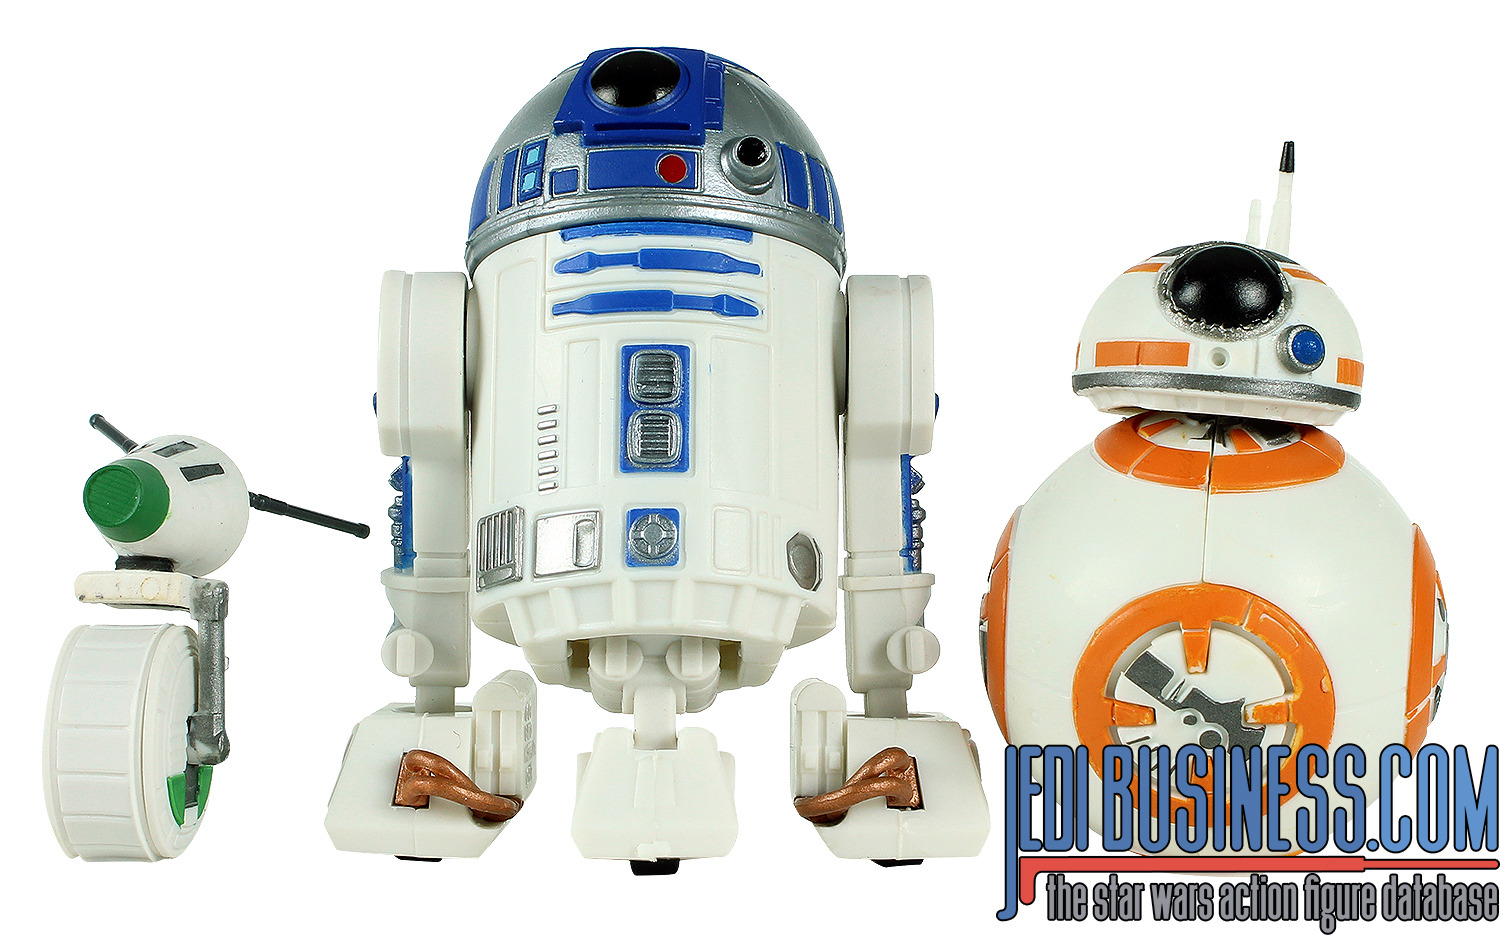 BB-8 Droid 3-Pack